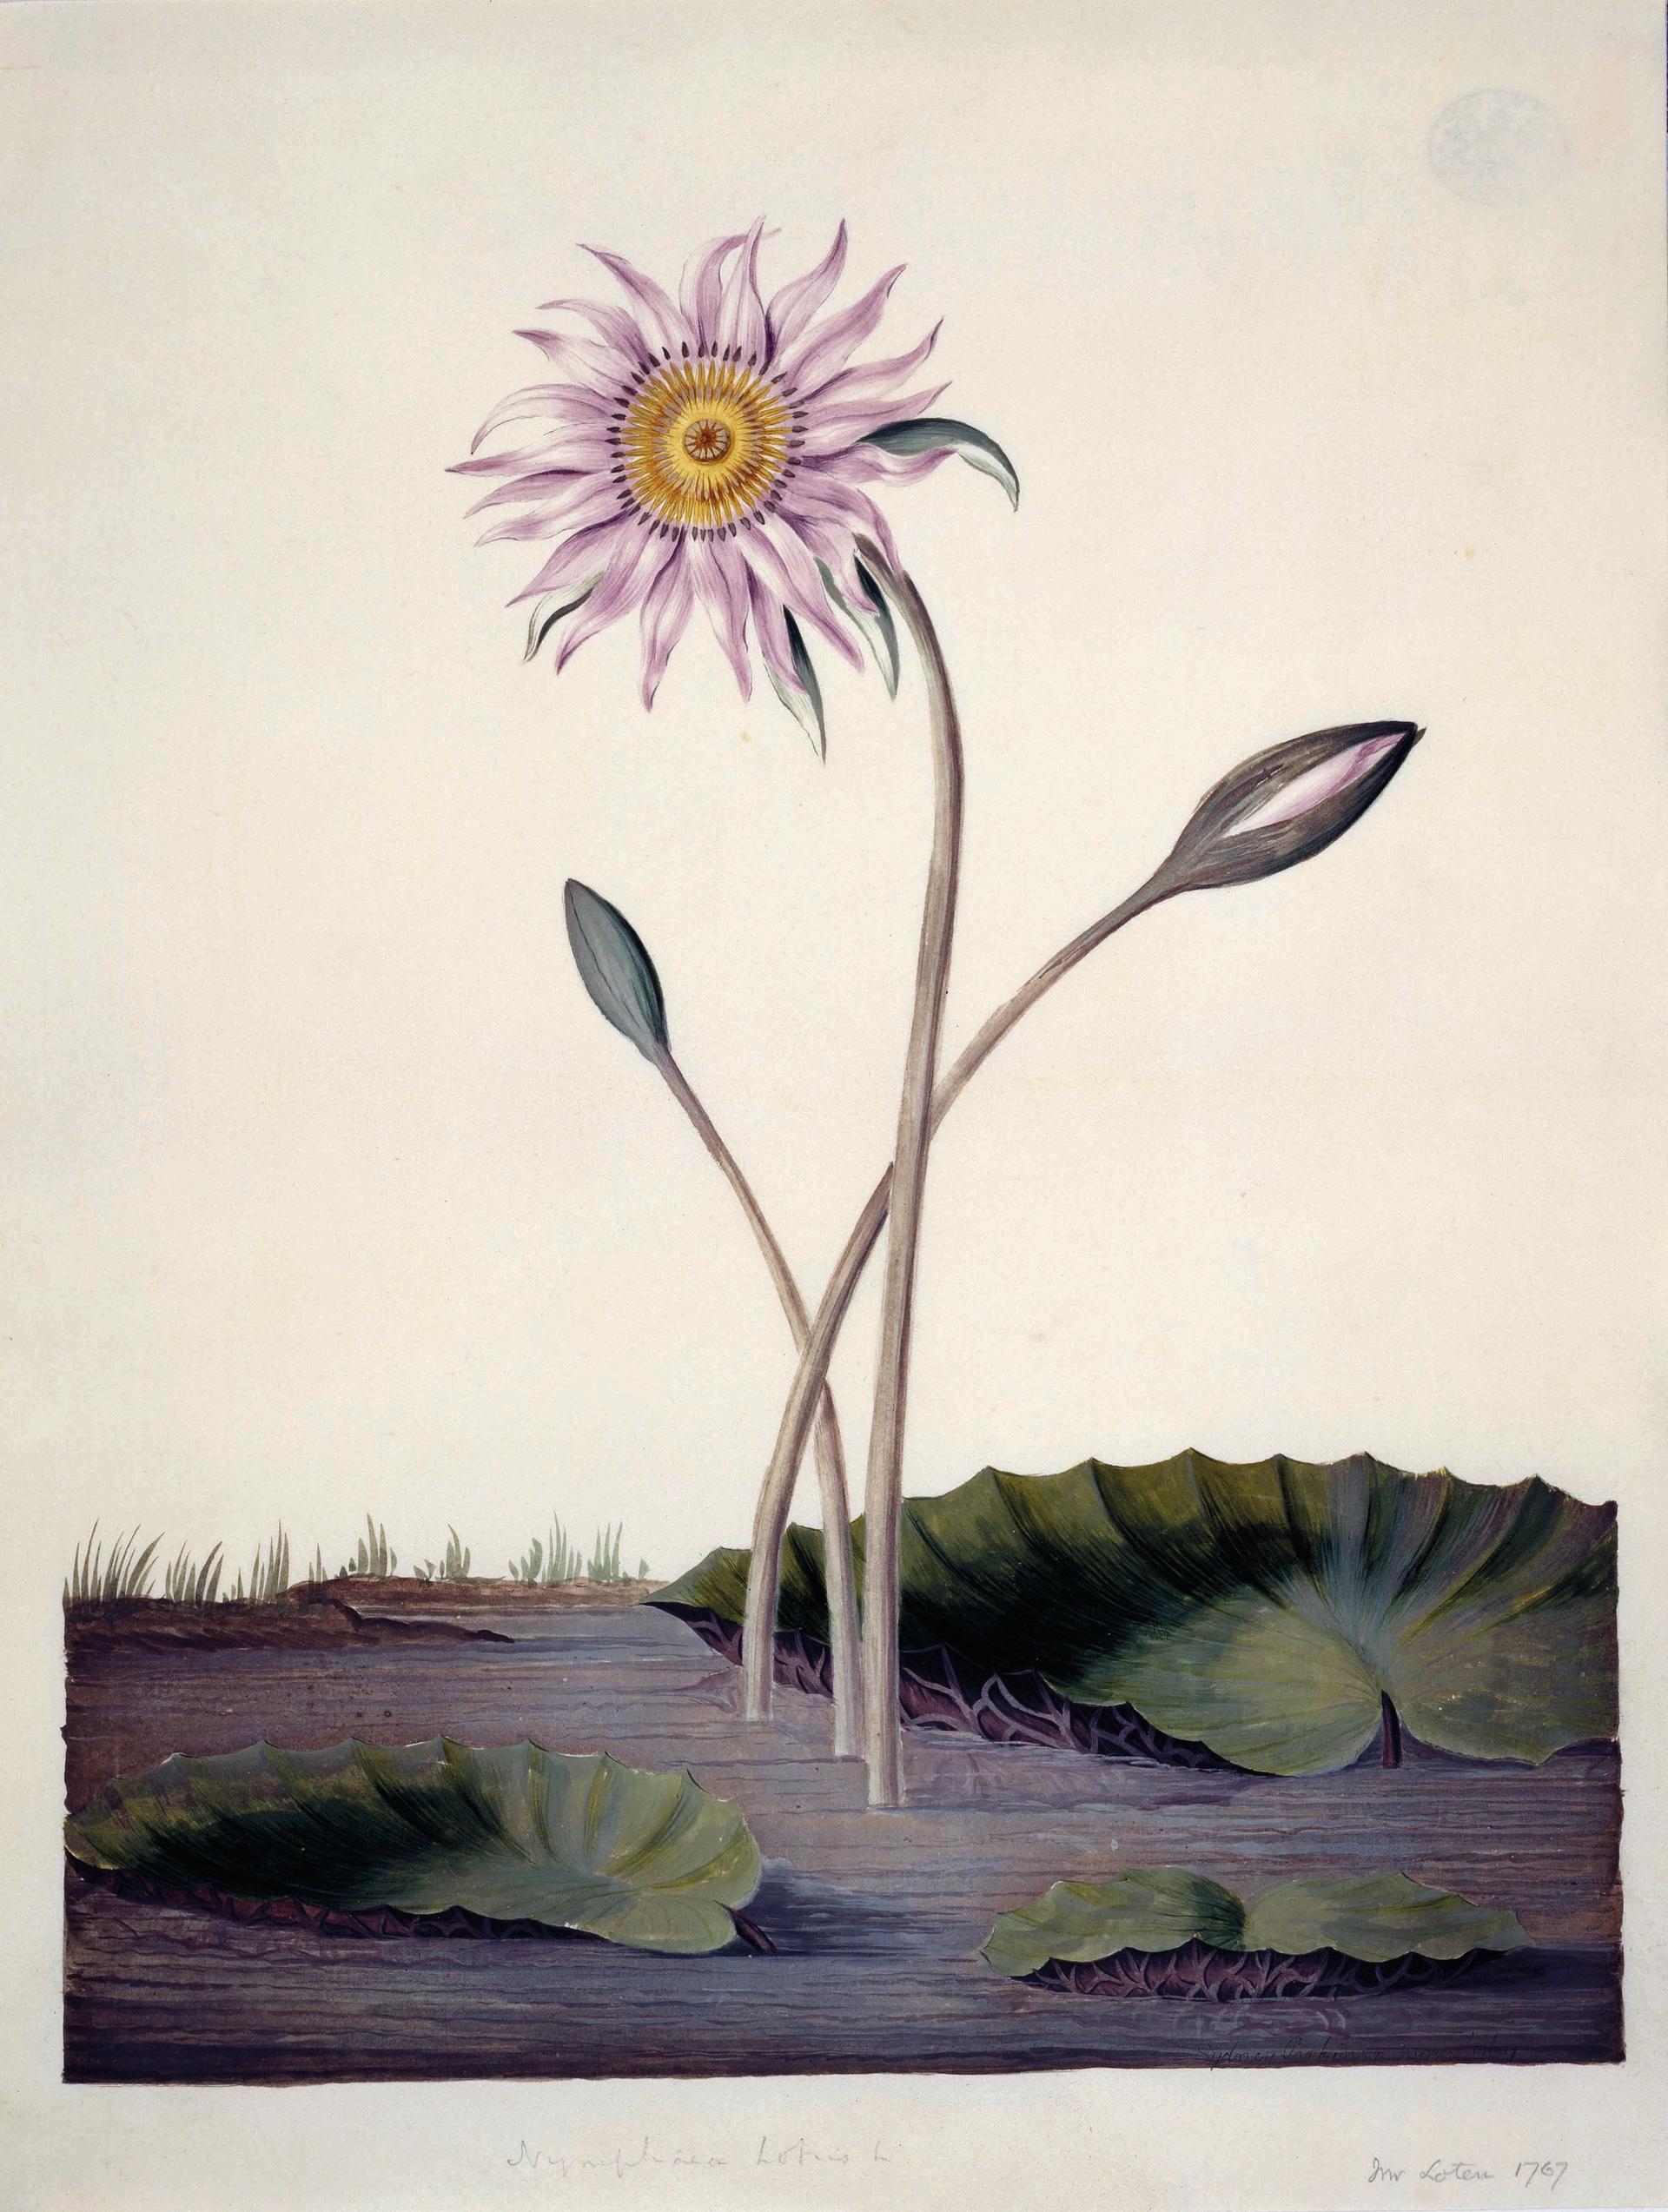 Sydney Parkinson, A lotus in bud and full flower (1767) Courtesy of the Natural History Museum